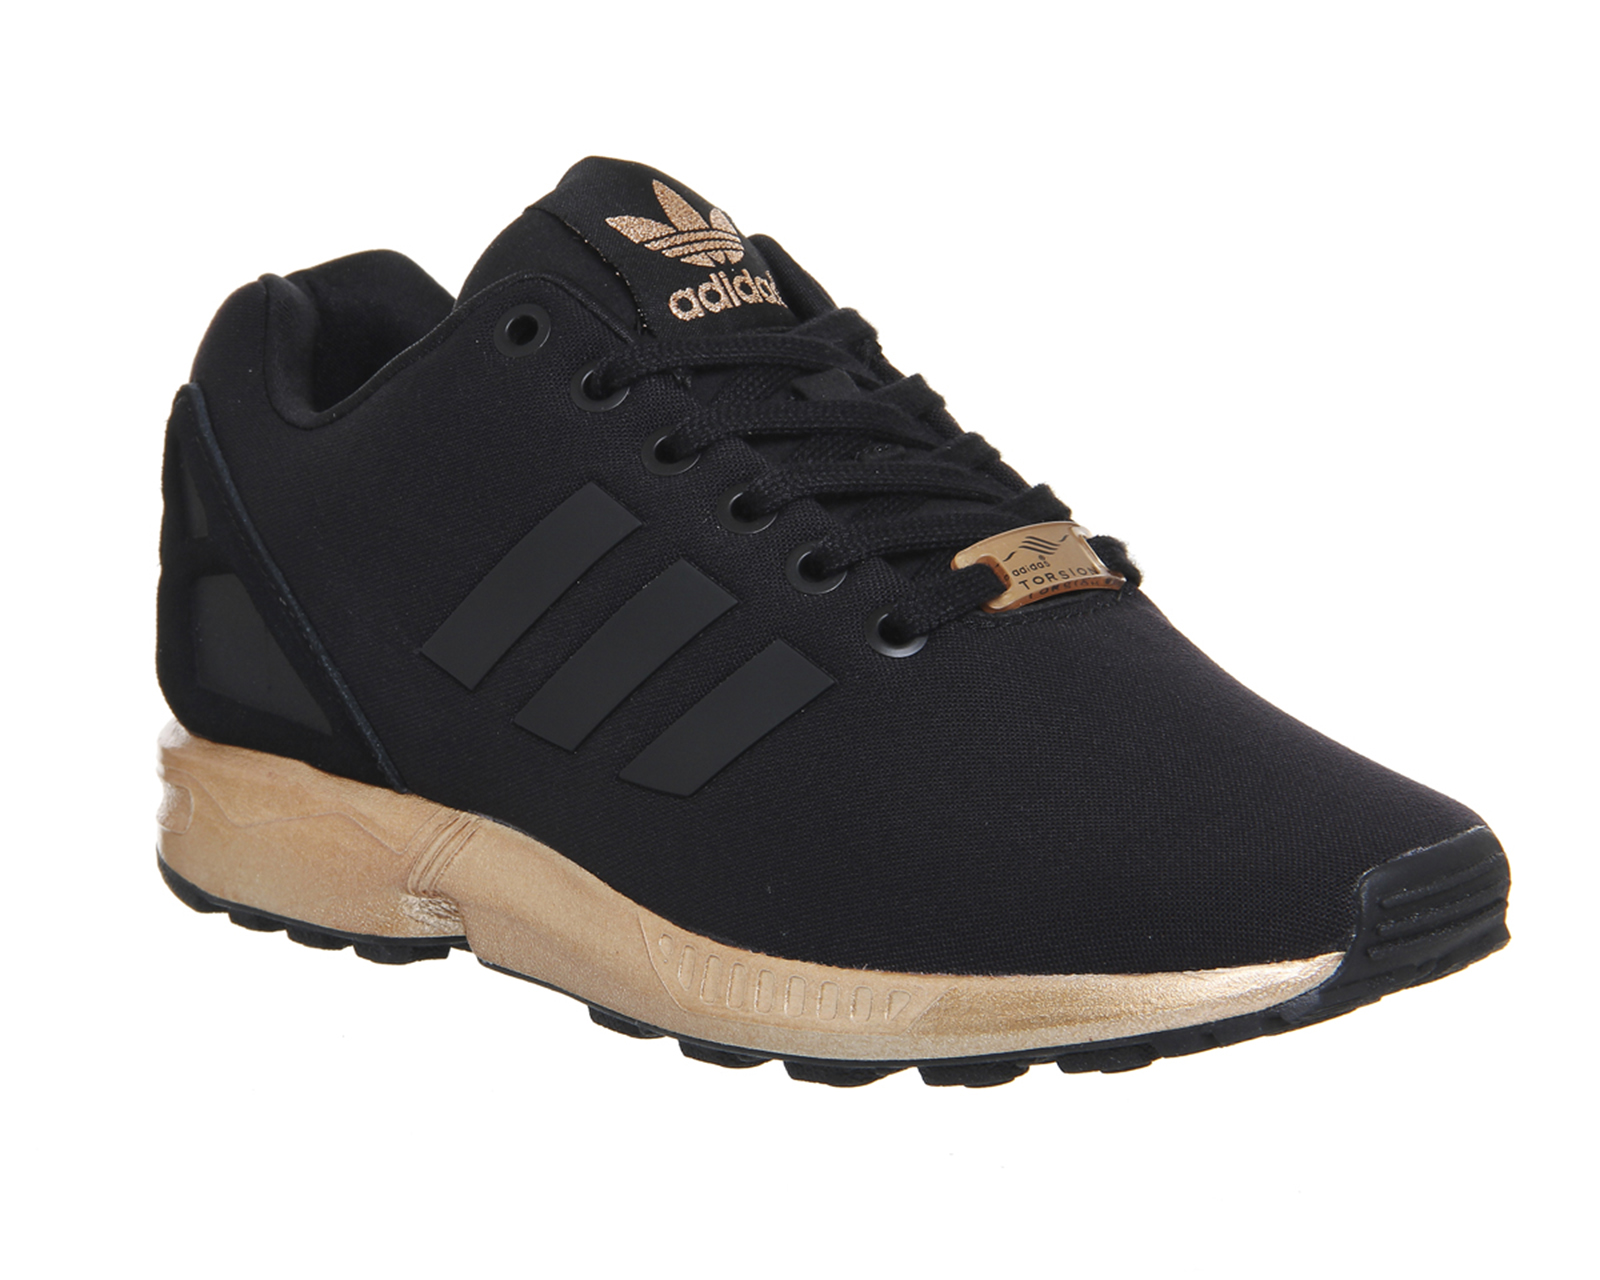 adidas zx flux black and rose gold